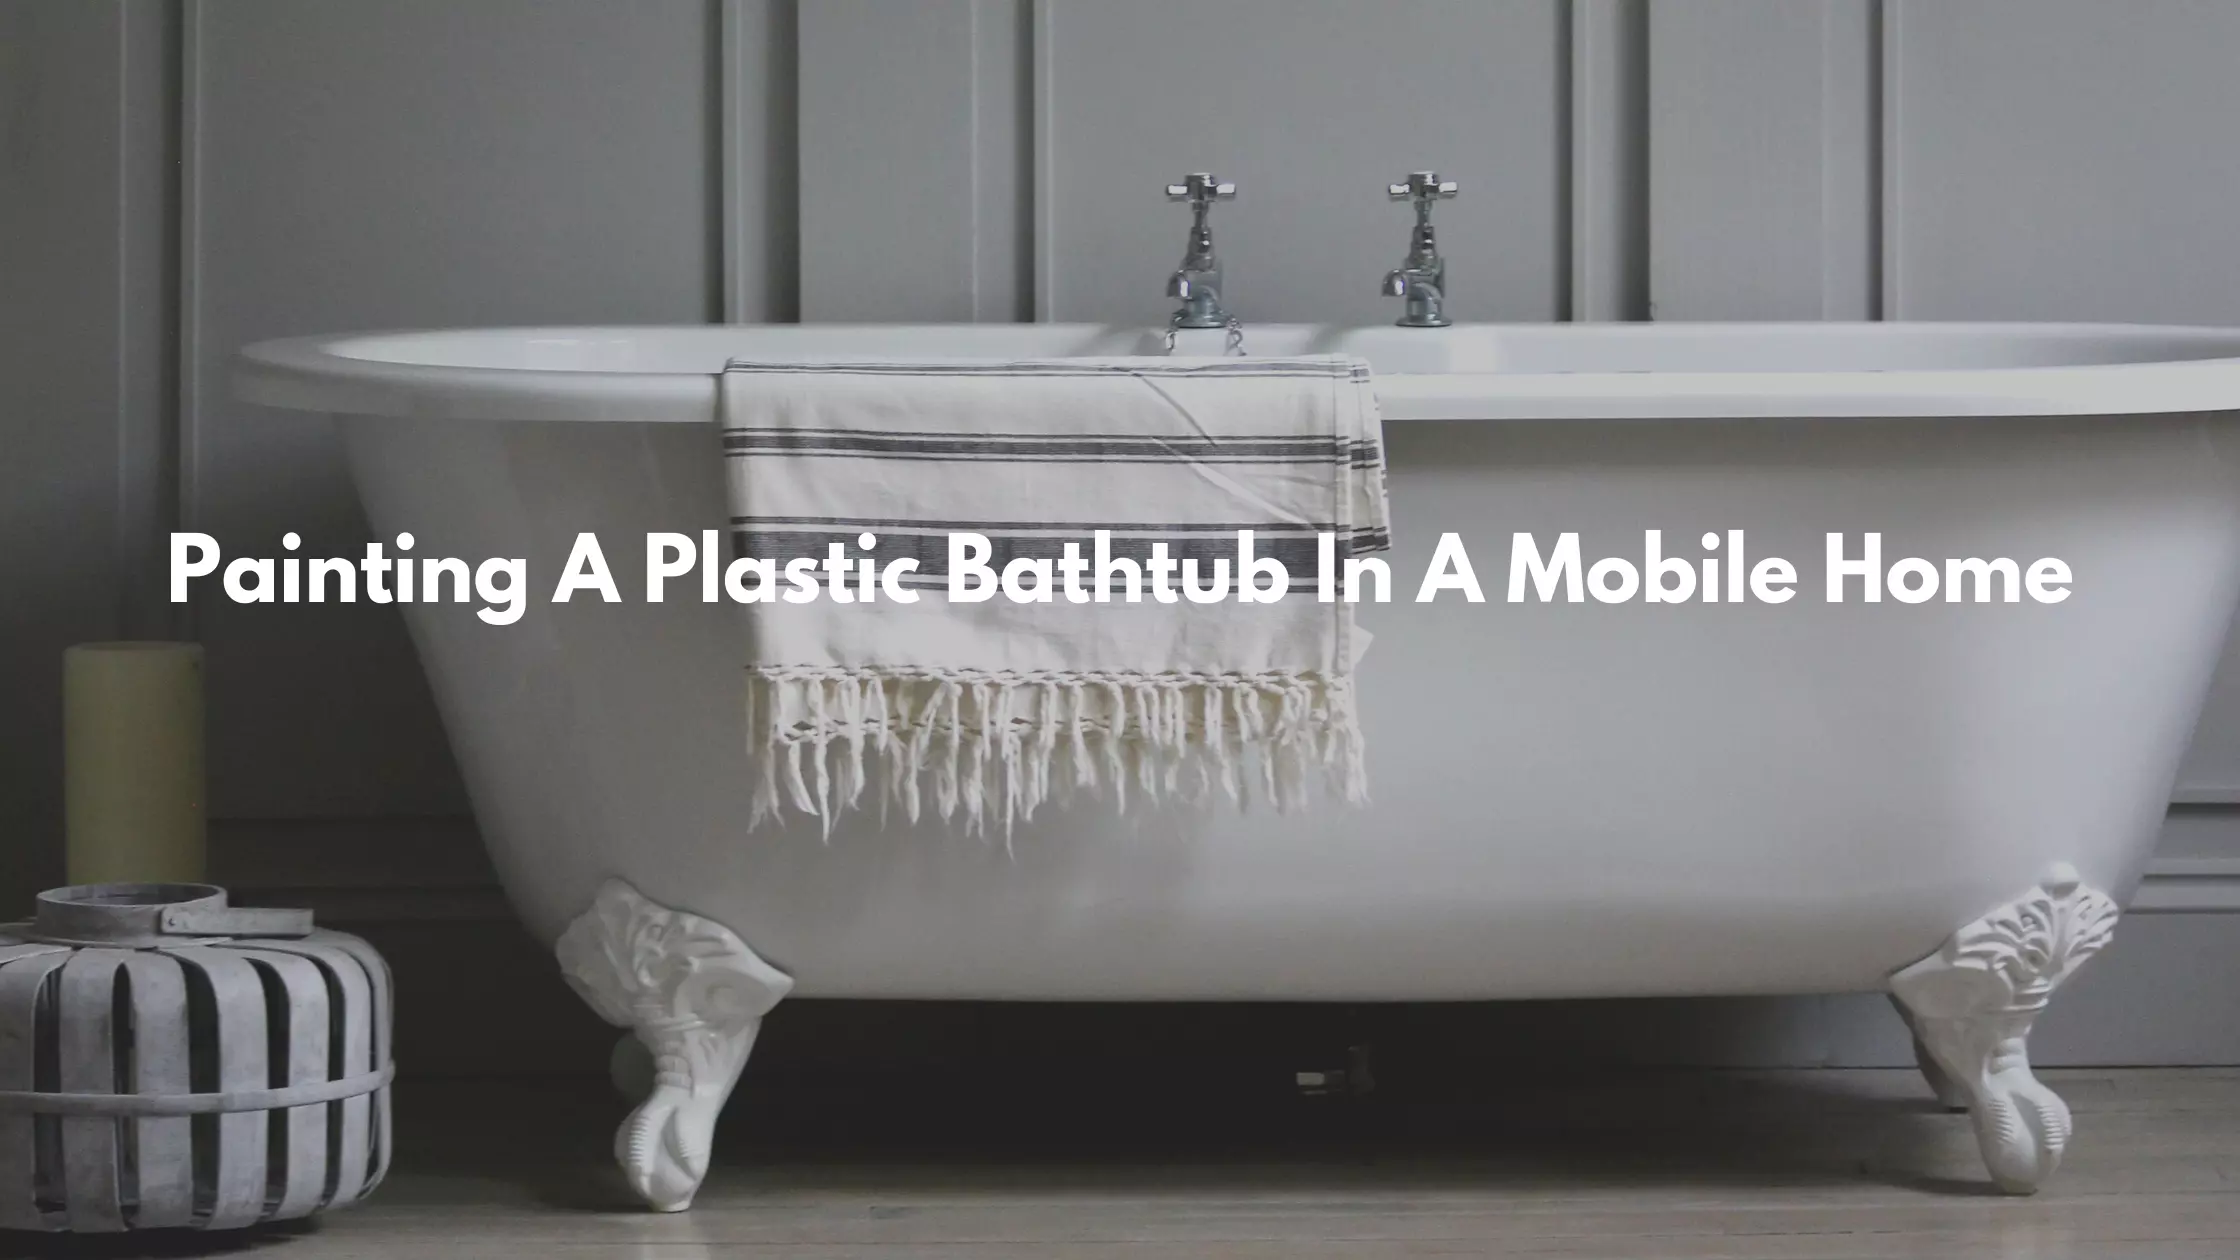 How To Paint A Plastic Bathtub In A Mobile Home